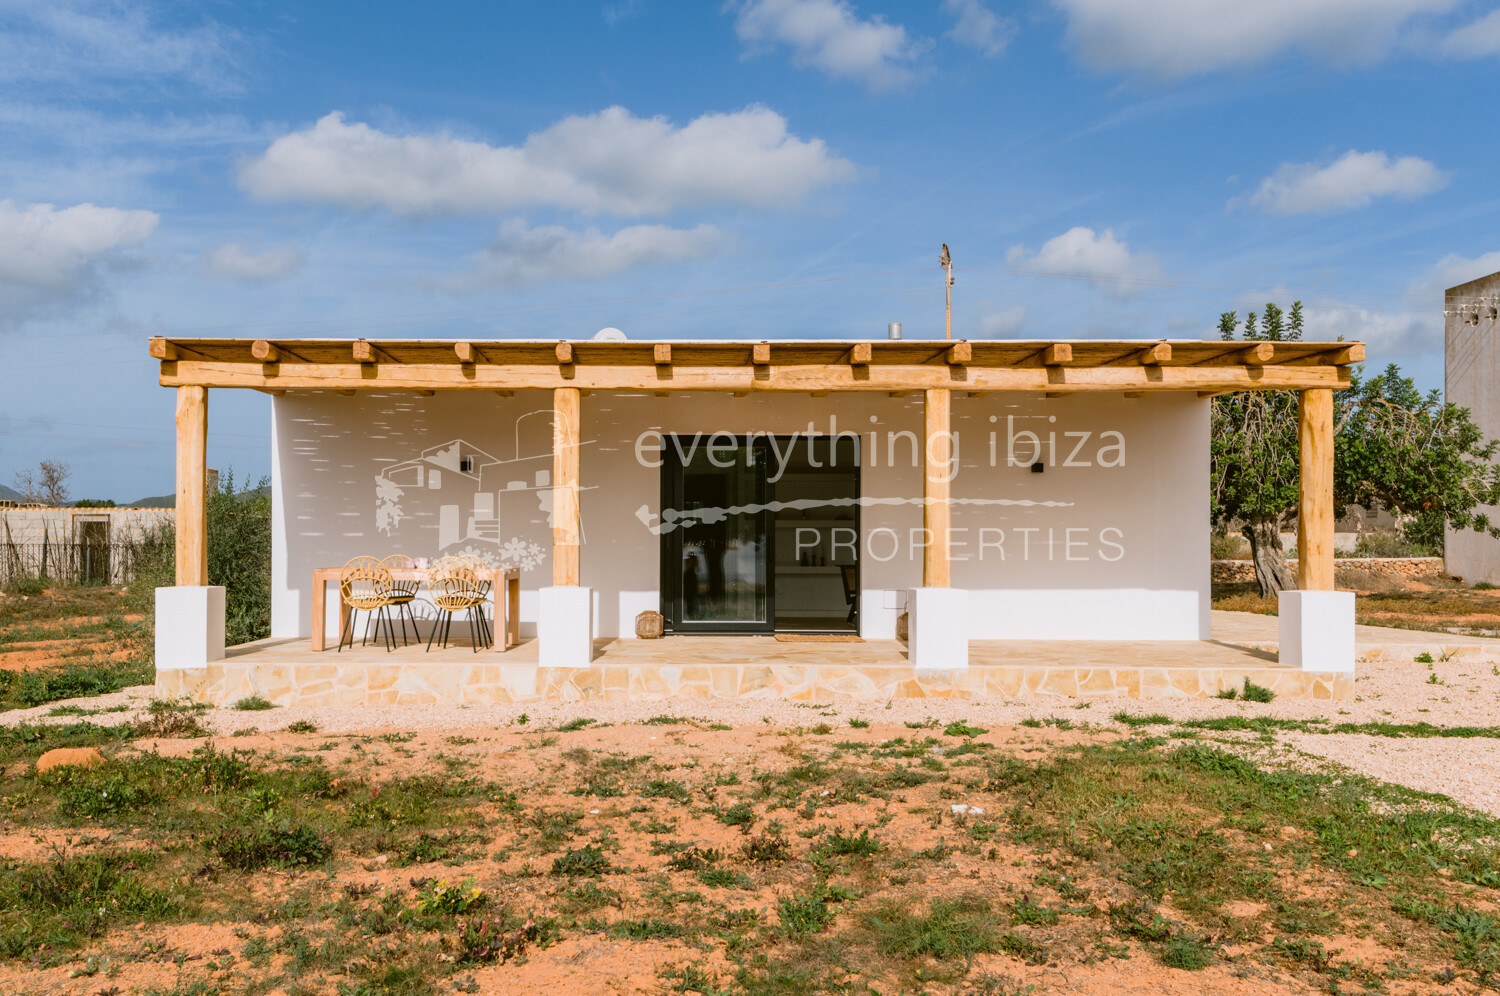 Beautifully Restored Rural Finca in San Jordi, ref. 1642, for sale in Ibiza by everything ibiza Properties